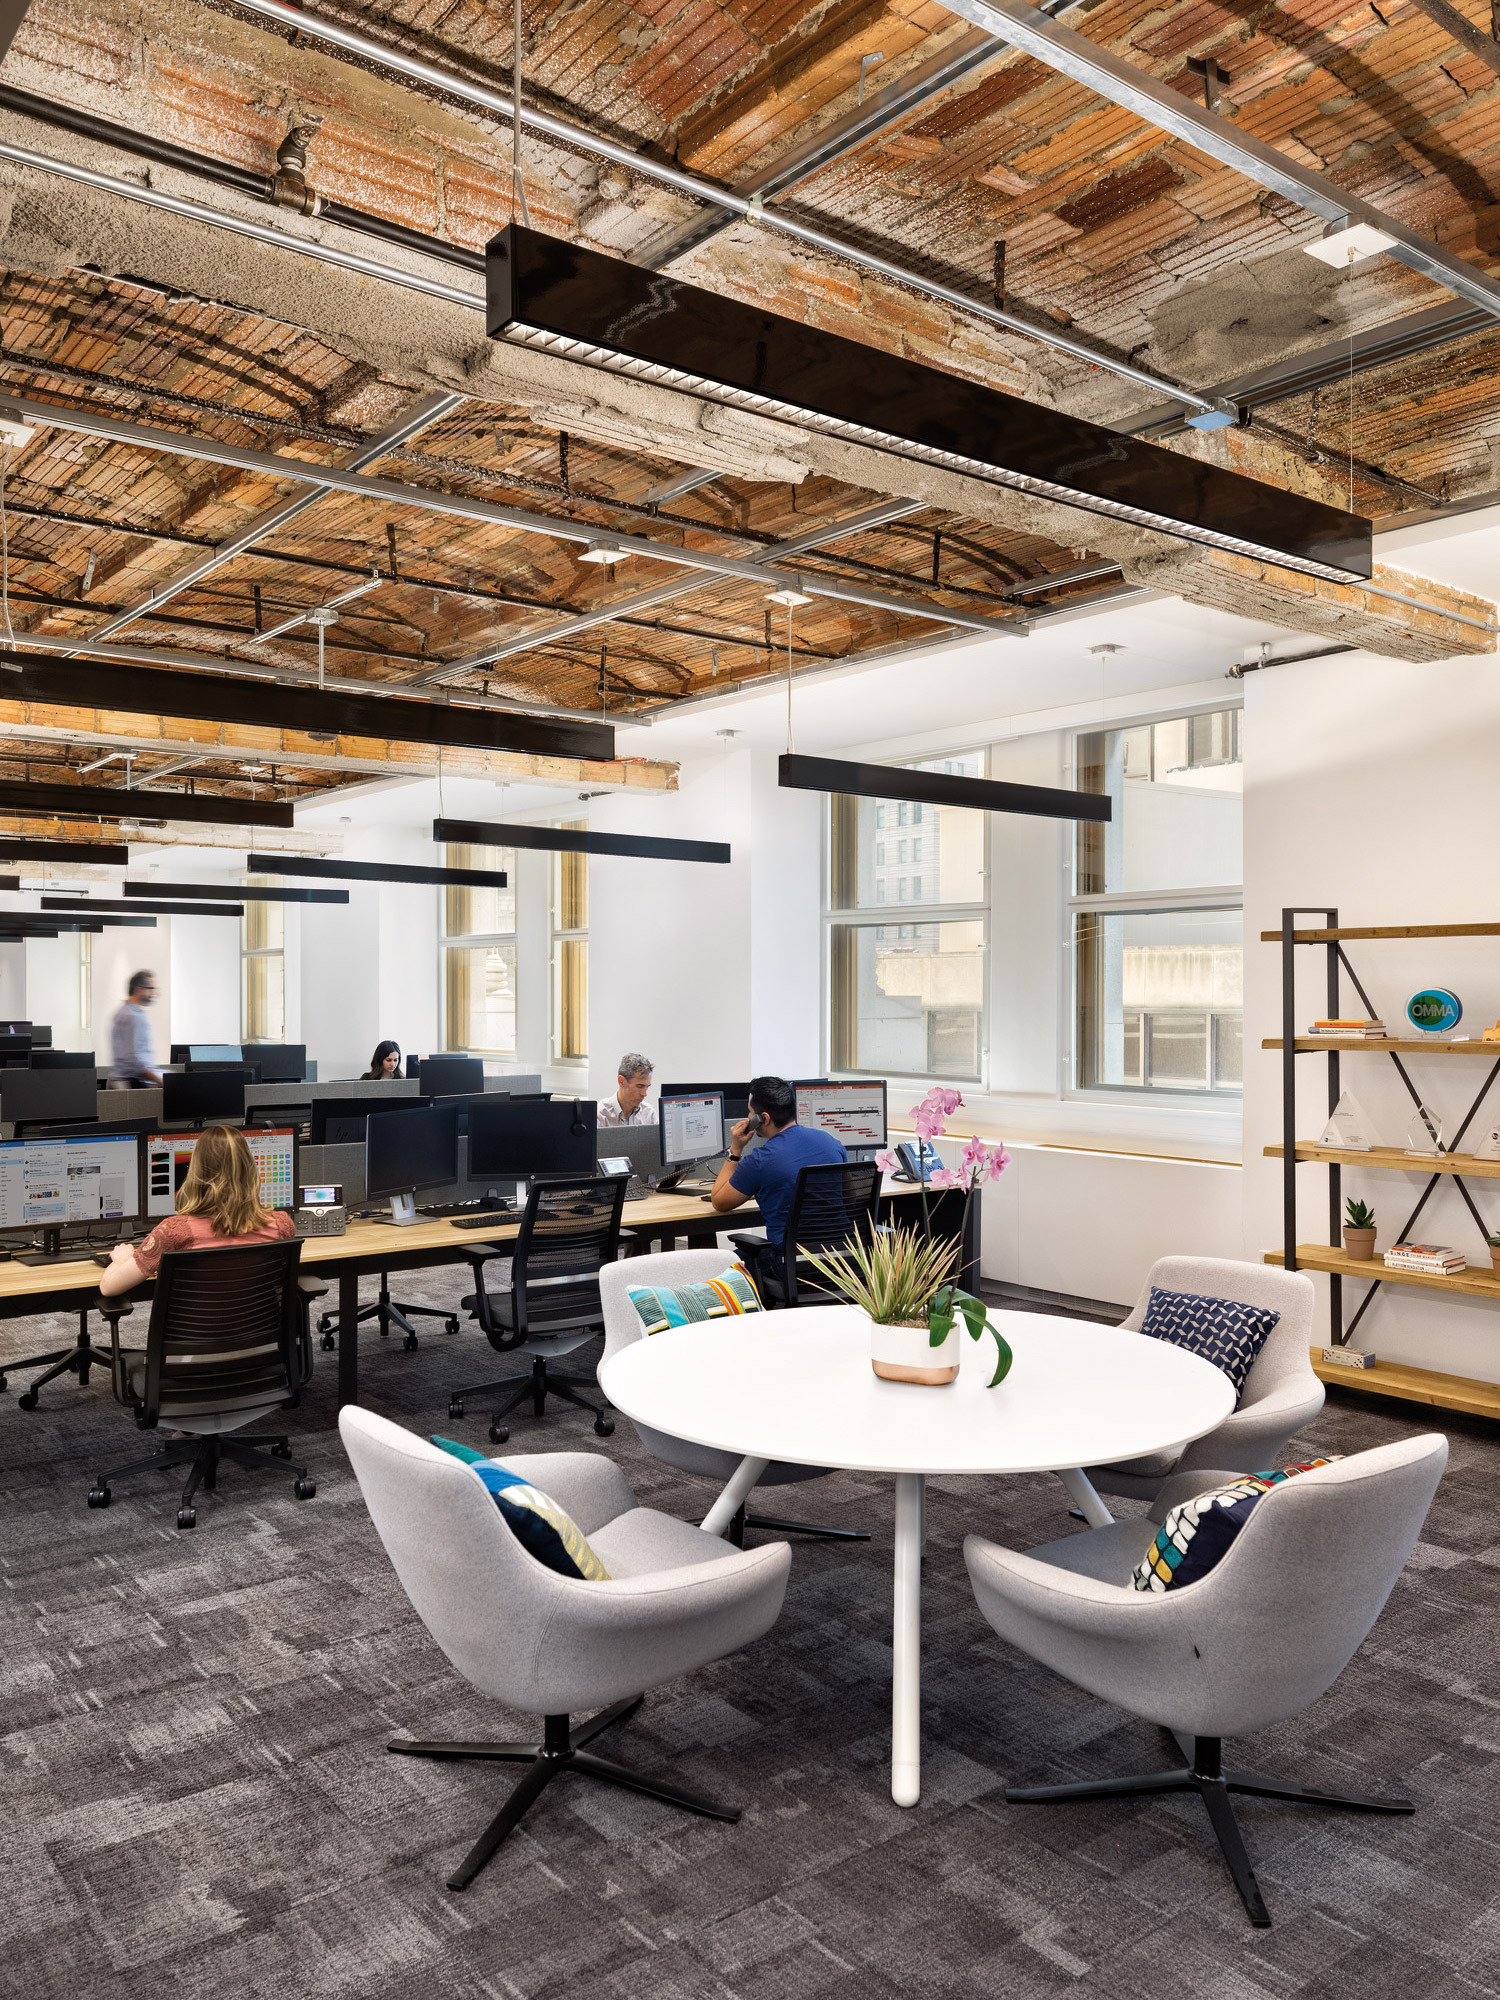 Modern open-plan office space featuring exposed wooden ceiling beams, natural daylight, ergonomic furniture with plush gray seating, and a minimalist white round table centering a collaborative area. Ambient lighting enhances the warm, productive atmosphere amidst neutral color tones and green plant accents.